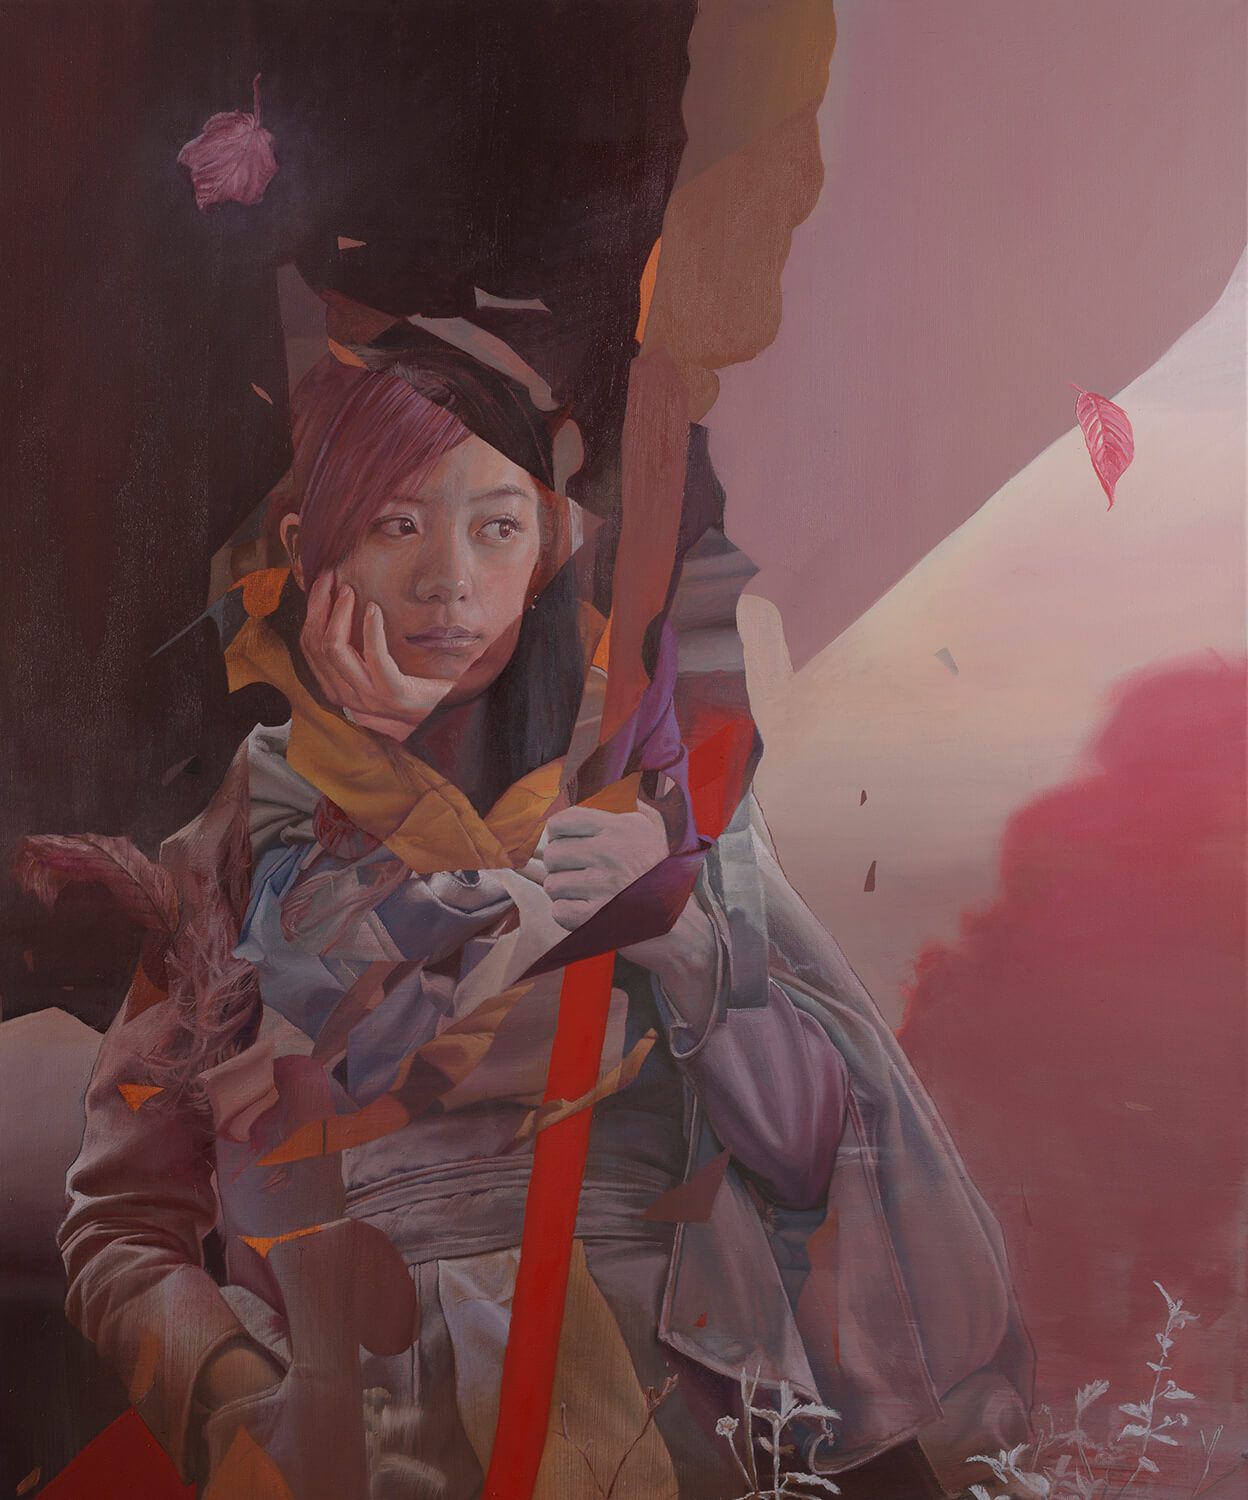 Worlds Within Worlds, The Collaborative Surrealism Of Telmo Miel (15)